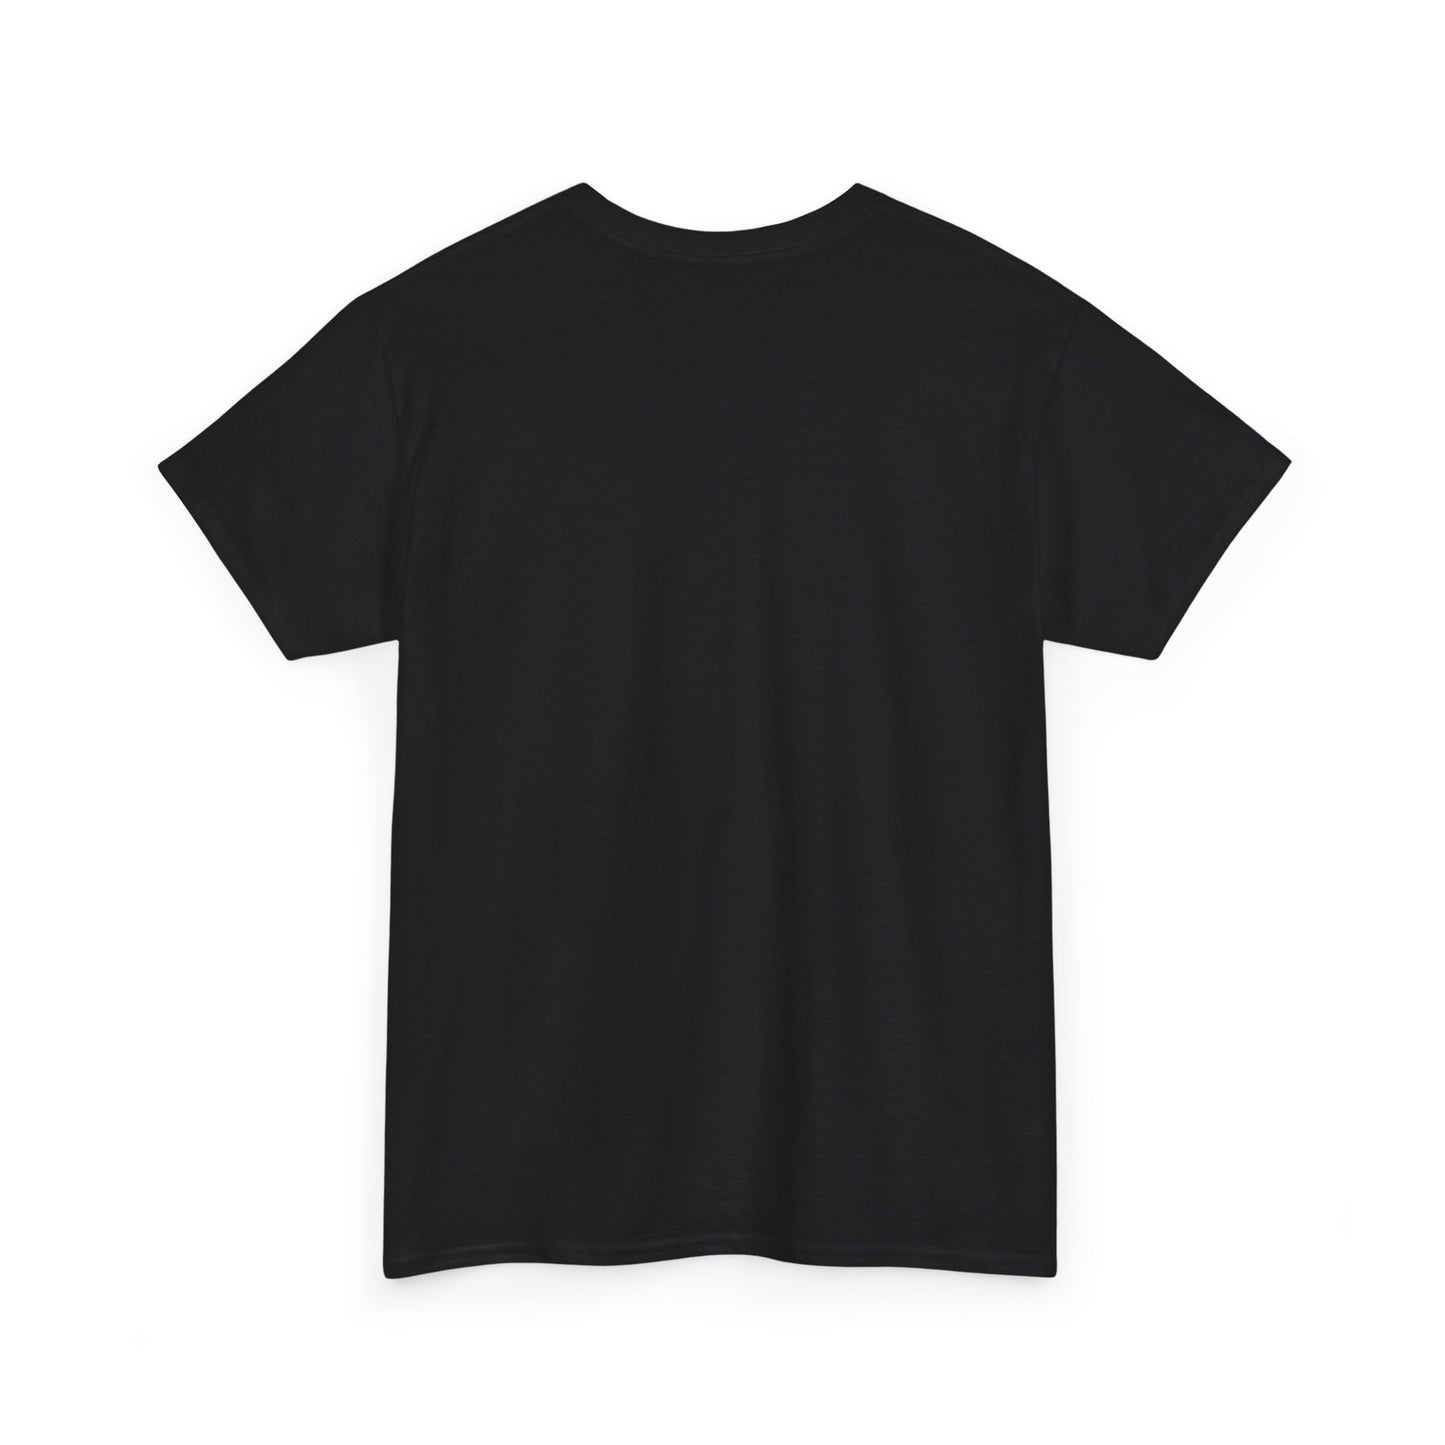 Damian Canfield Heavy Cotton Tee